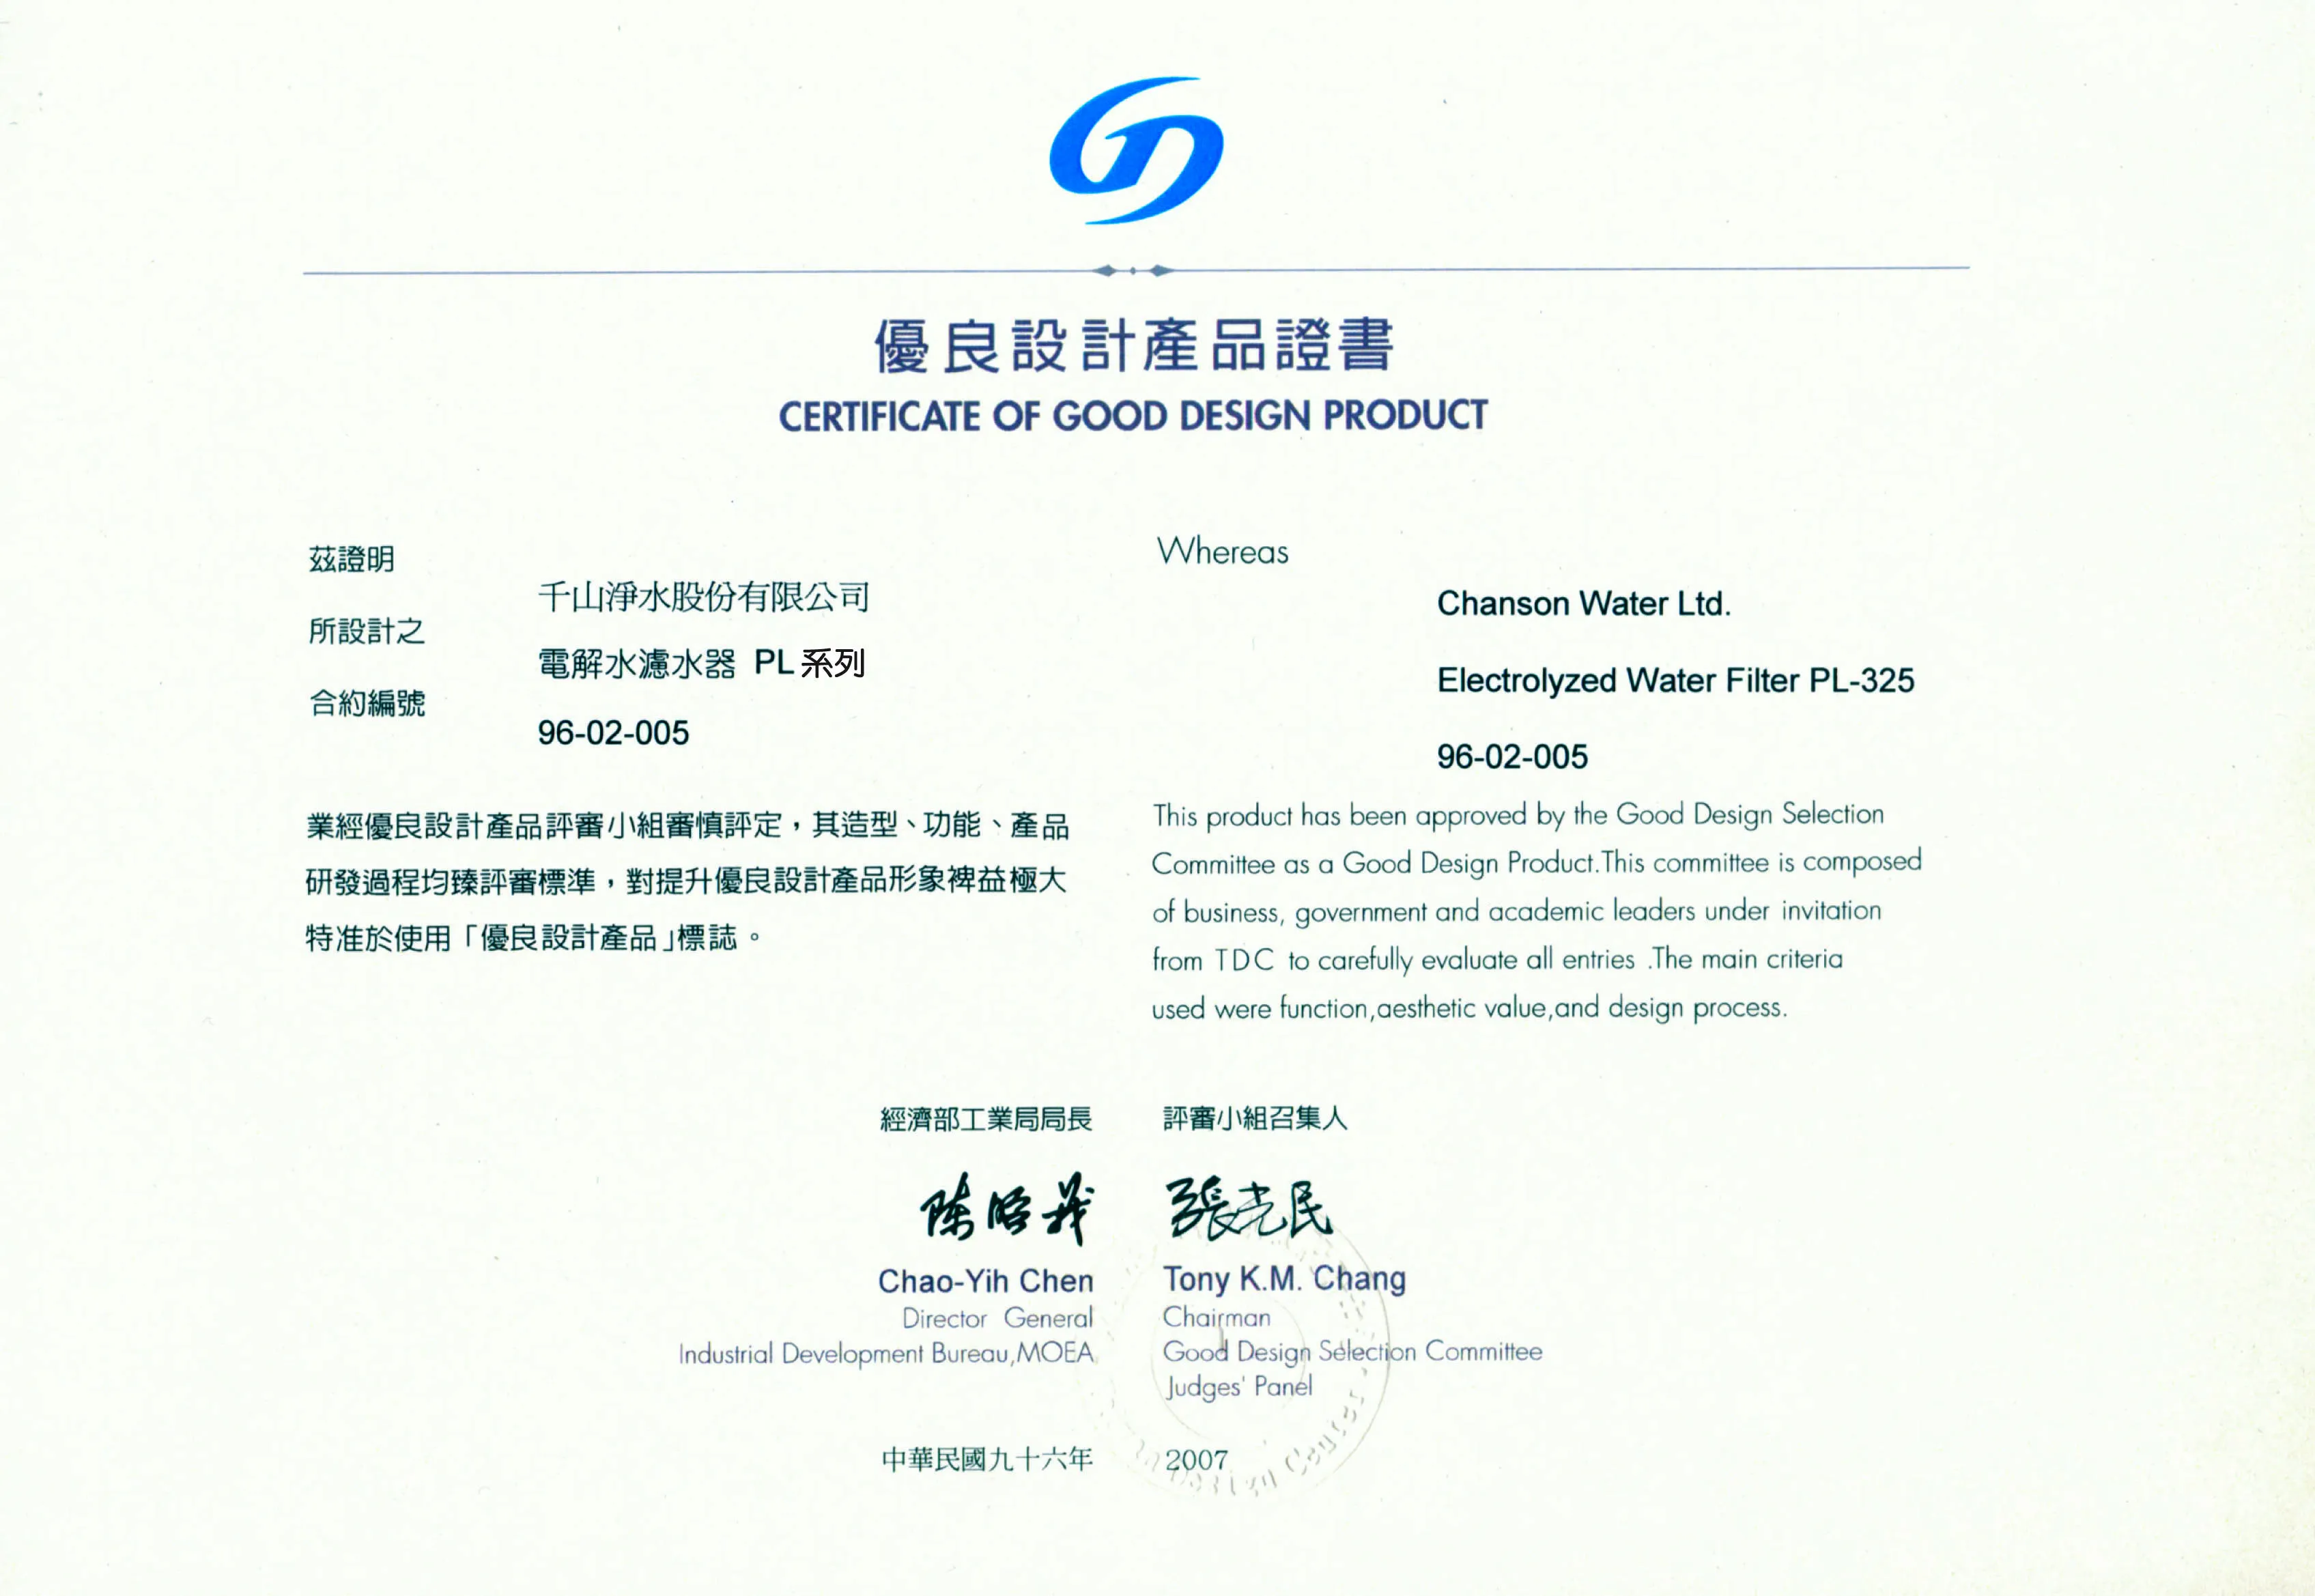 Certificate of good design product